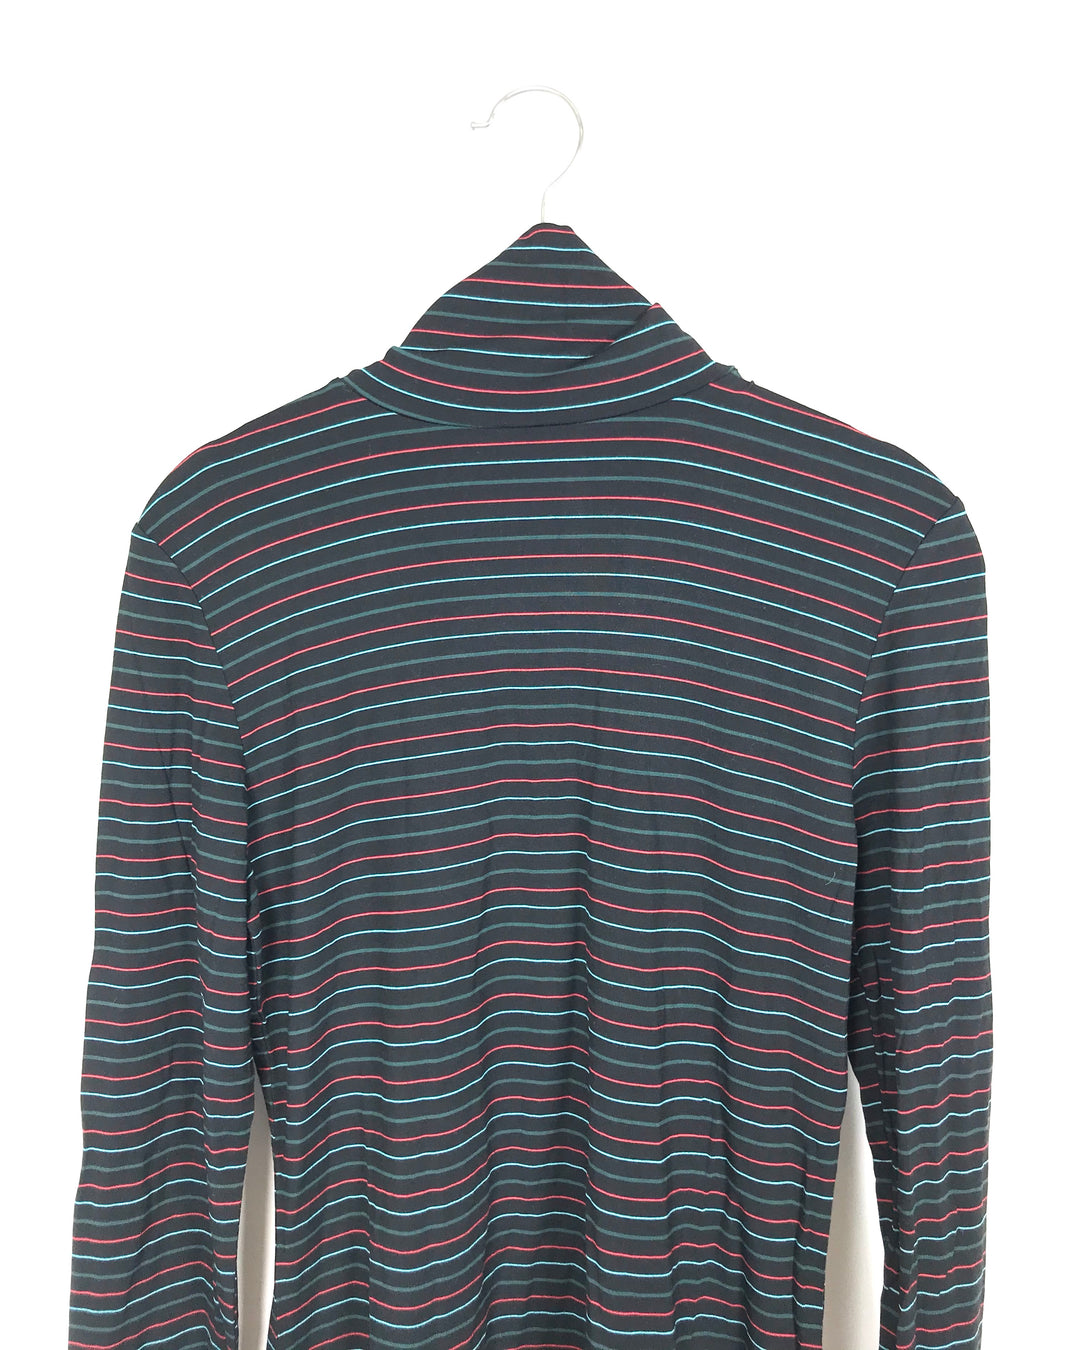 Black and Colorful Striped Turtle Neck - Small